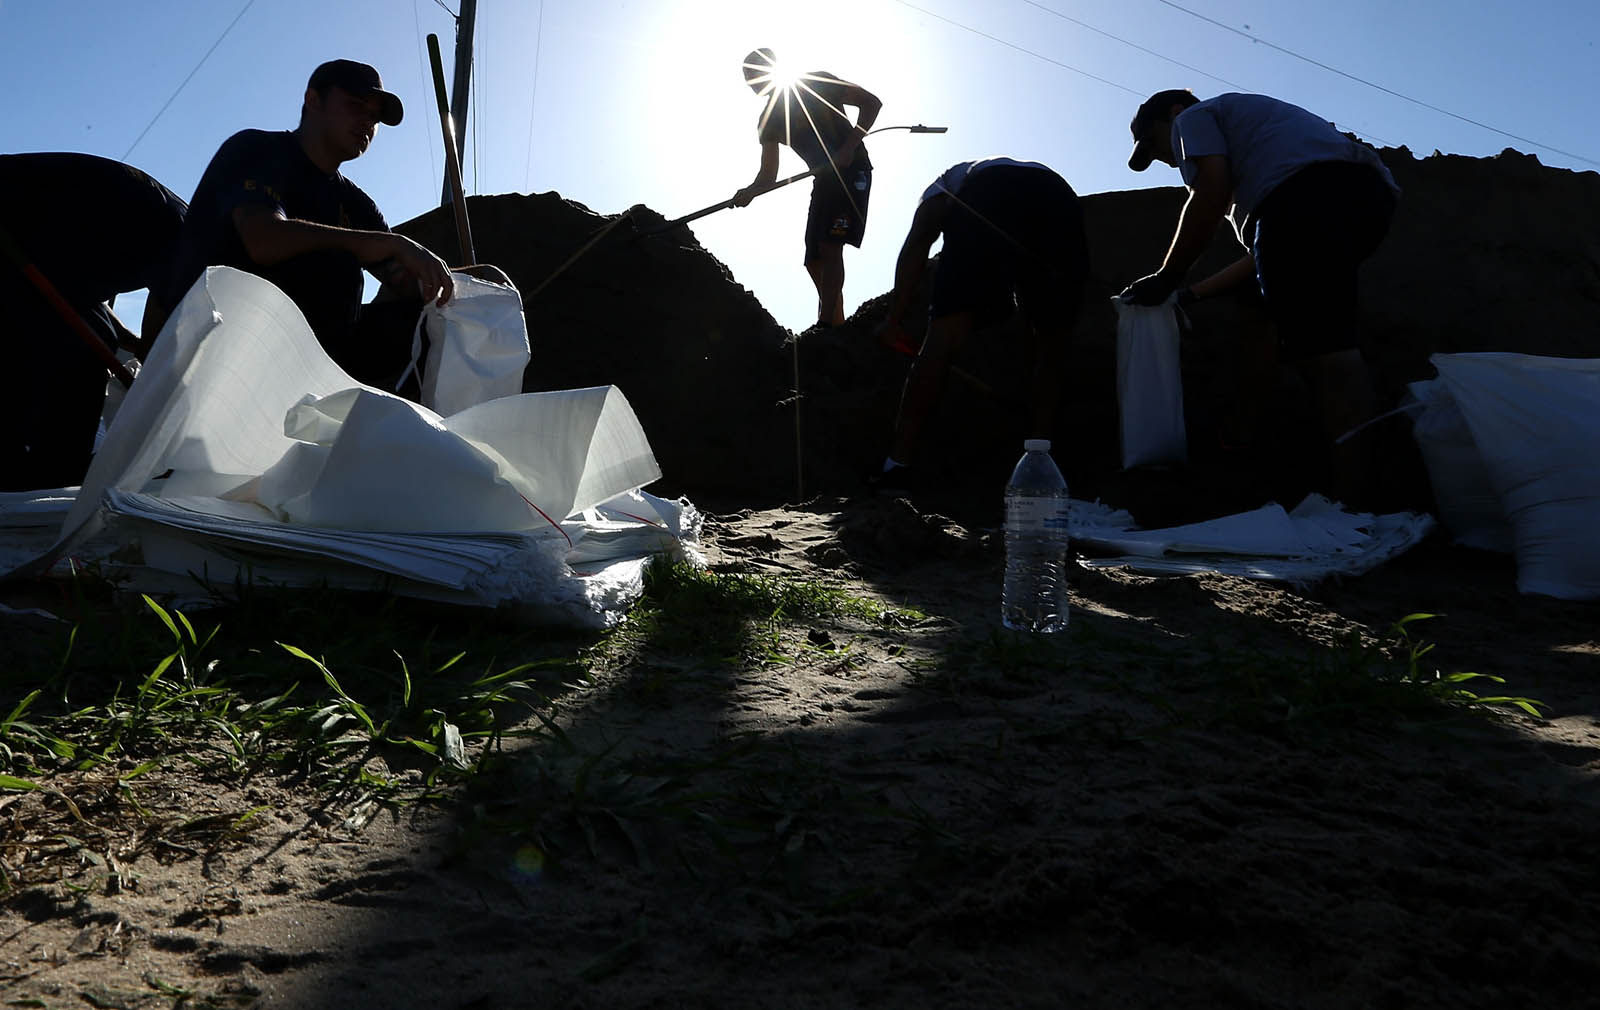 New Orleans residents fill sand bags in preparation for Tropical Storm Nate on October 6, 2017 in New Orleans, Louisiana. Nate is expected to become a Catagory 1 Hurricane as it enters the Gulf of Mexico this weekend.  (Photo by Sean Gardner/Getty Images)